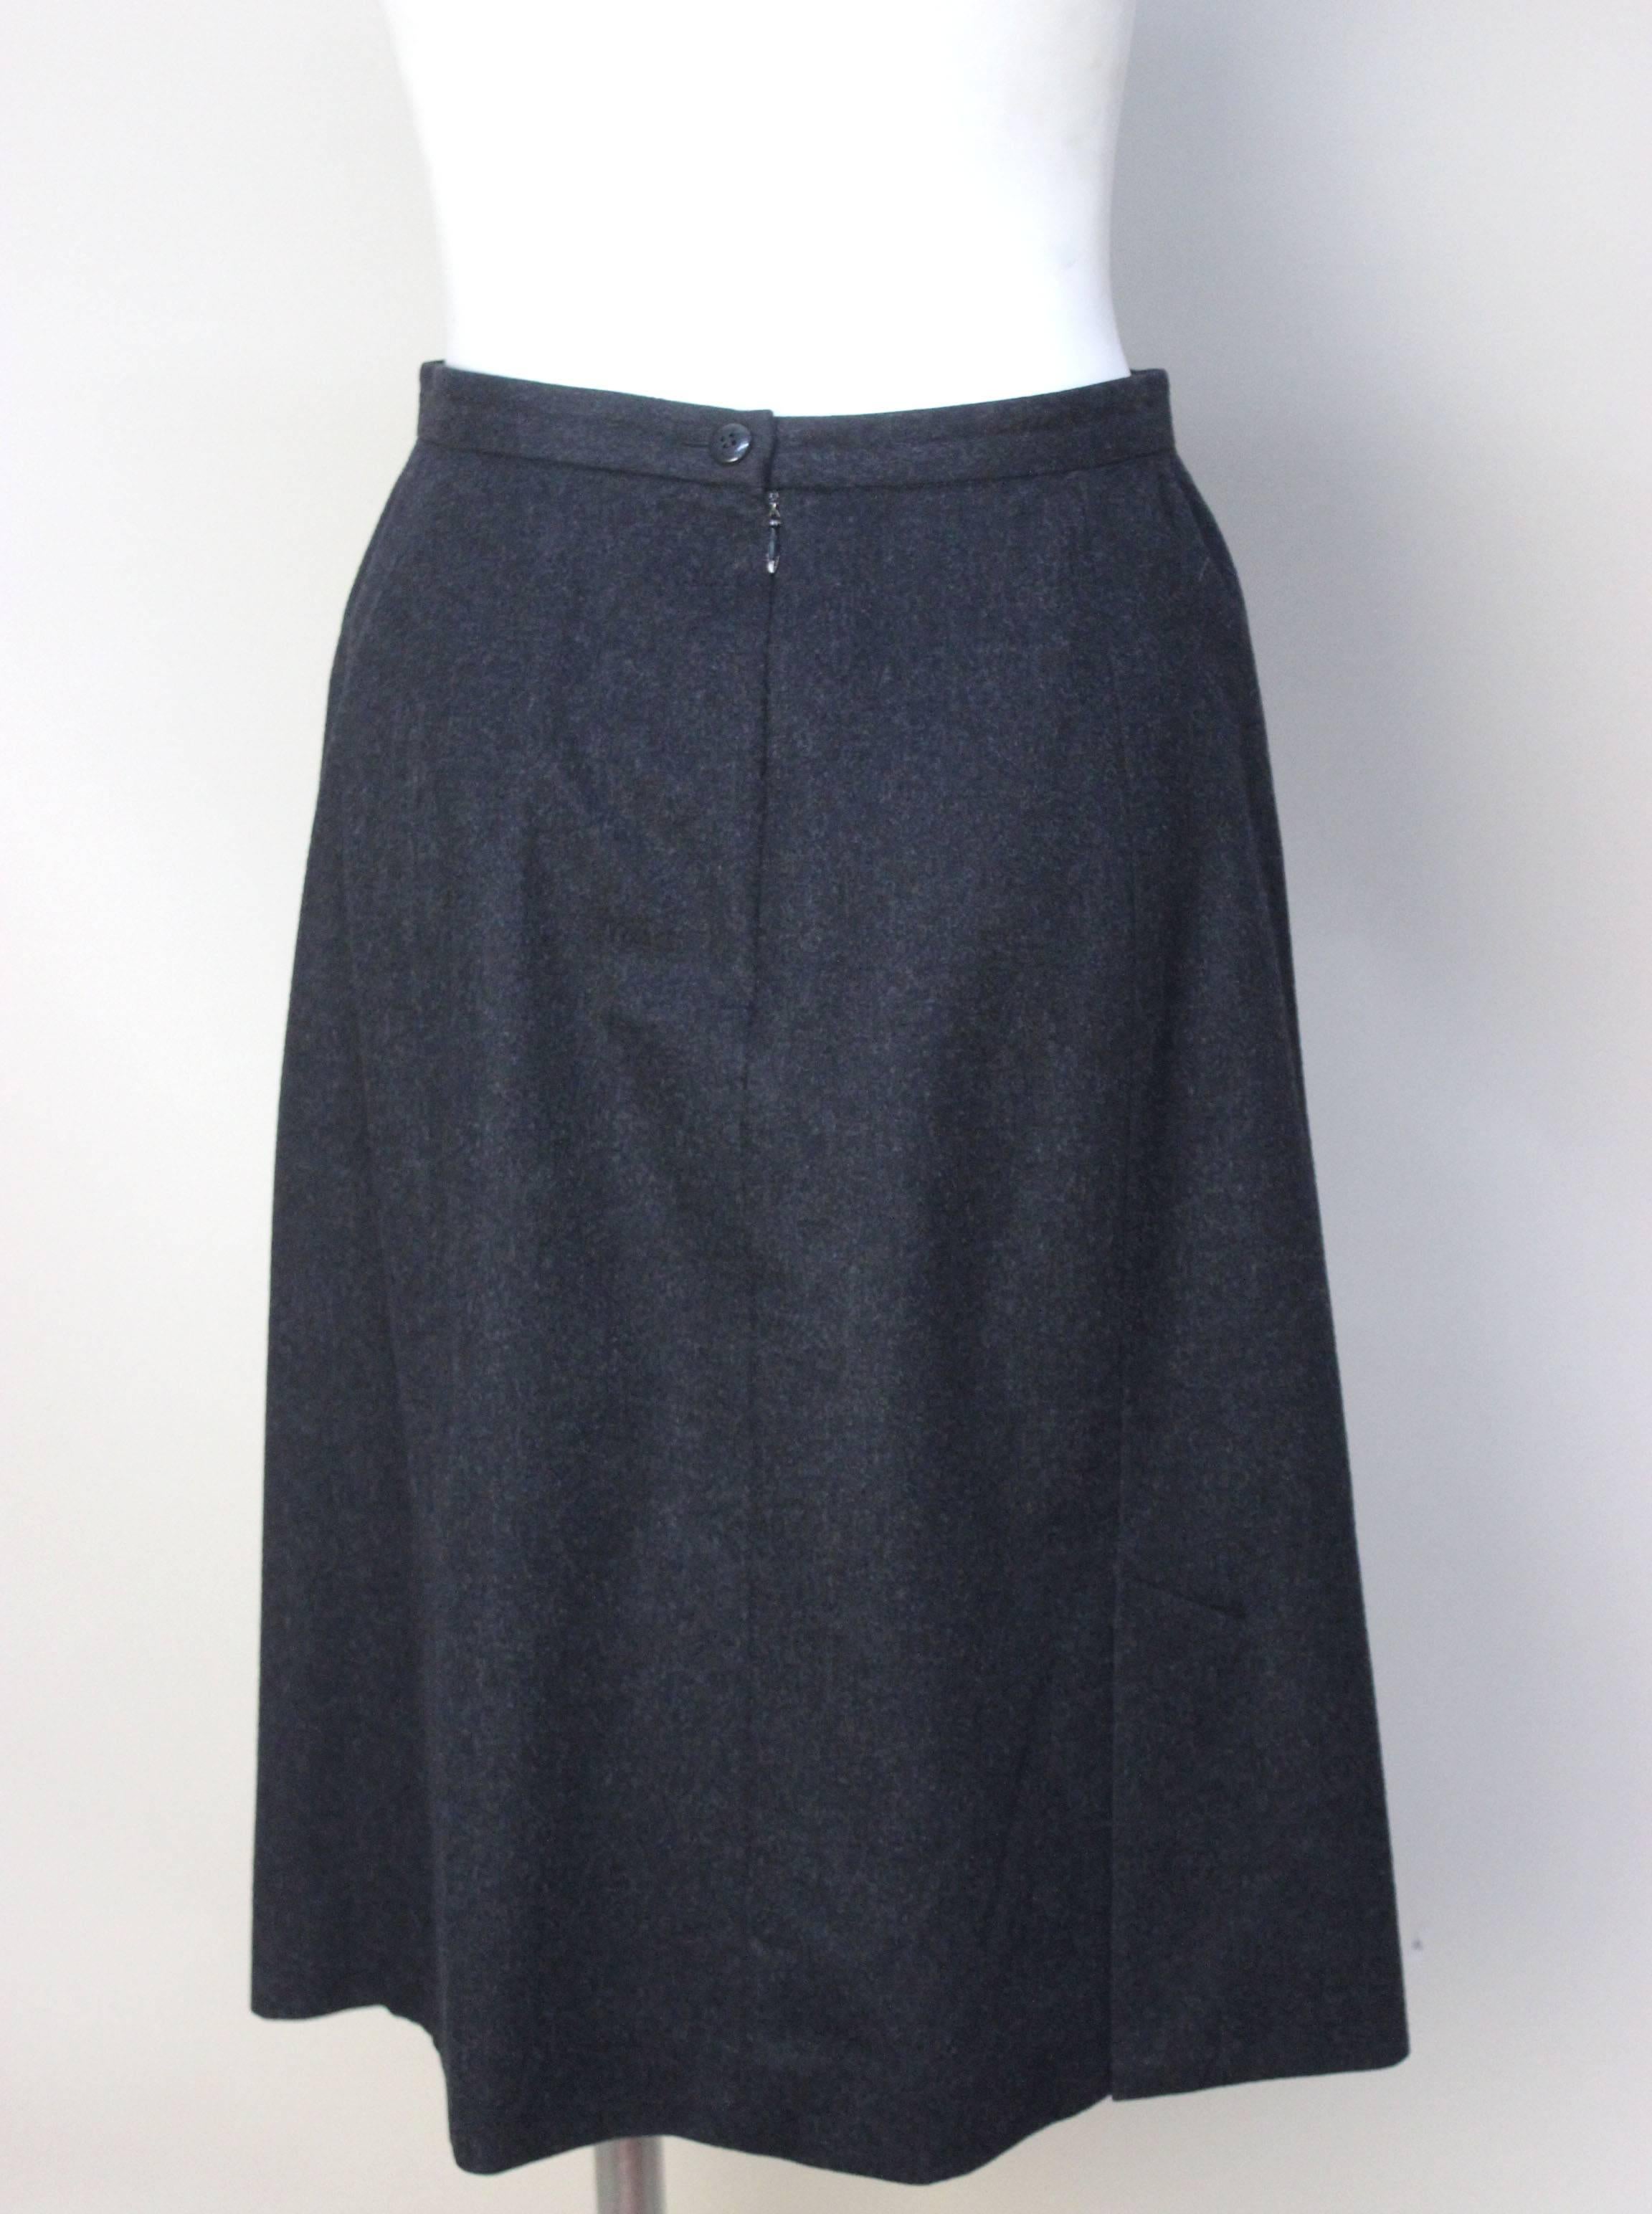 Isabel Toledo Tropical Wool Skirt In Excellent Condition For Sale In New York, NY